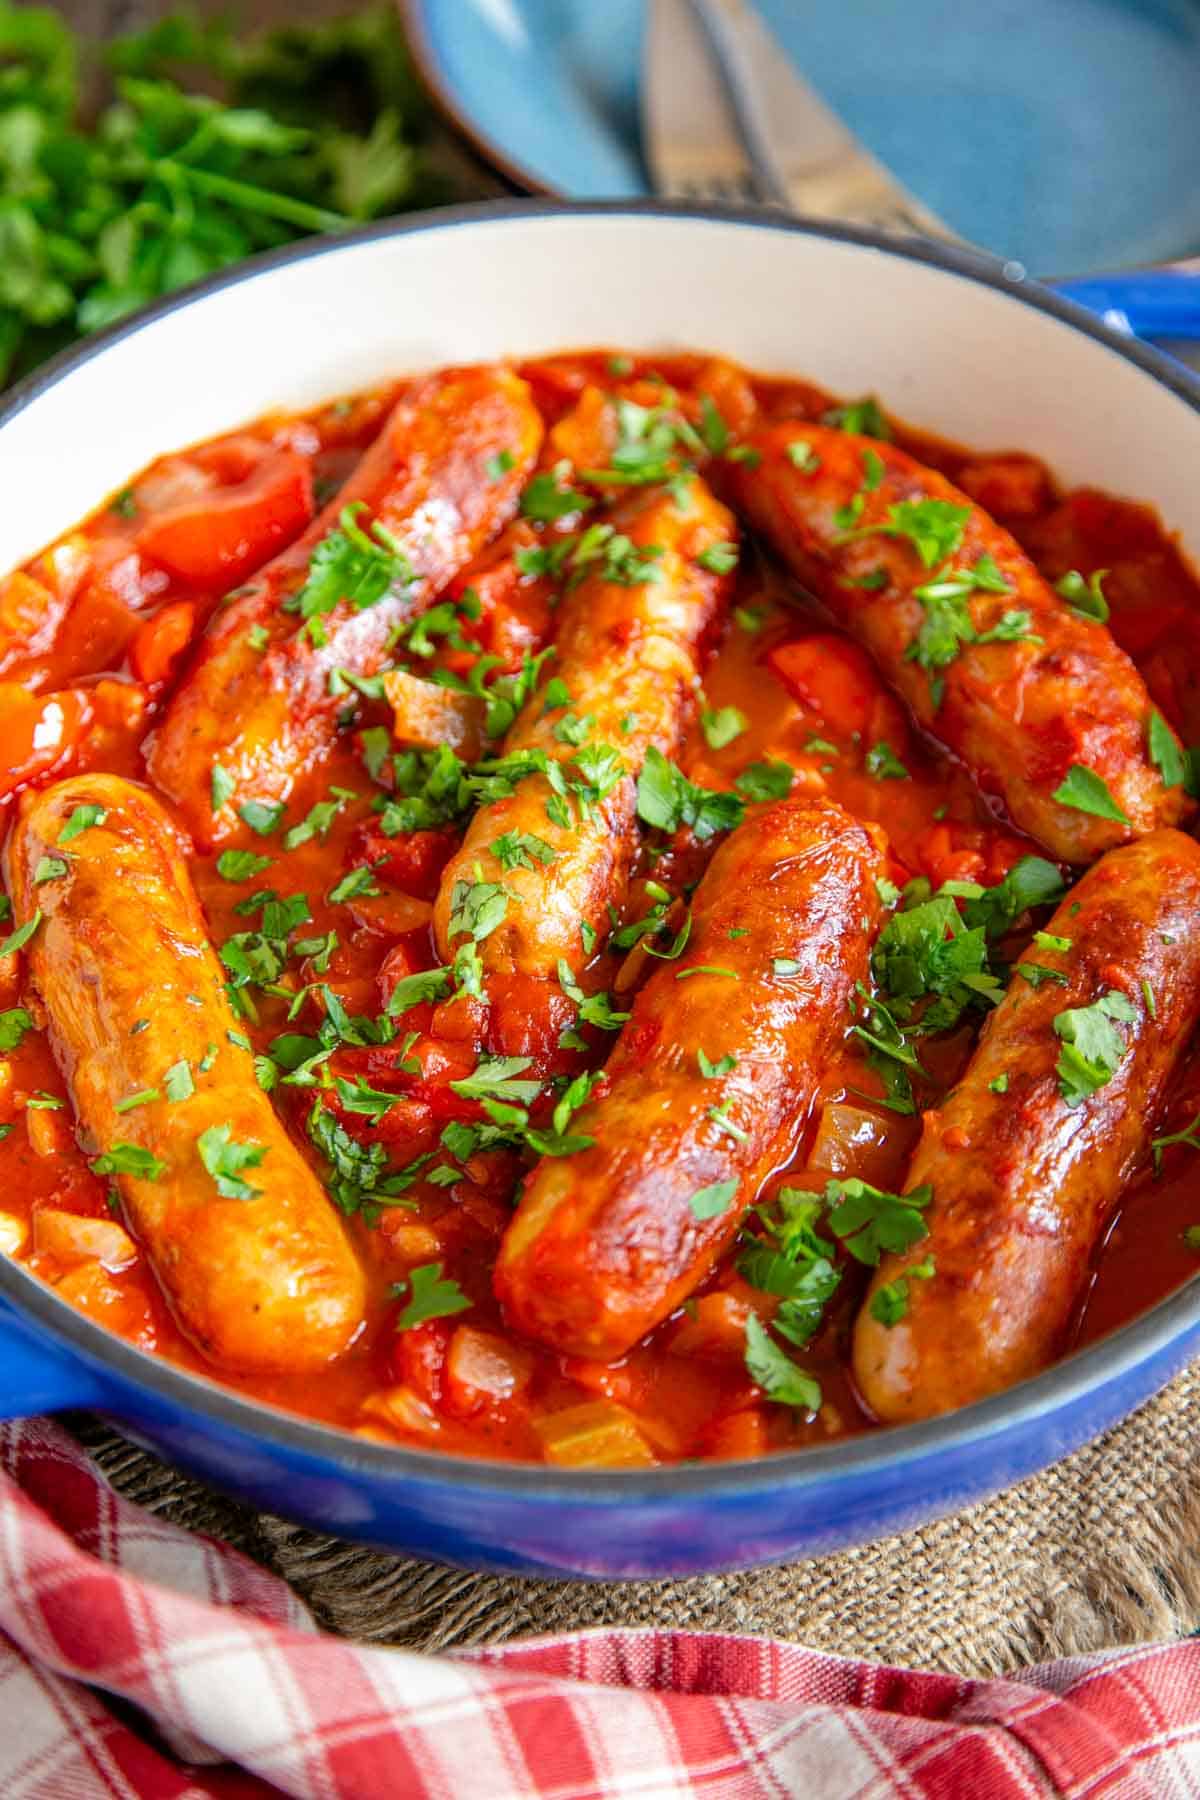 Rich delicious sausage casserole in close up, golden sausage in a rich, thick sauce of tomato, vegetables and bacon.